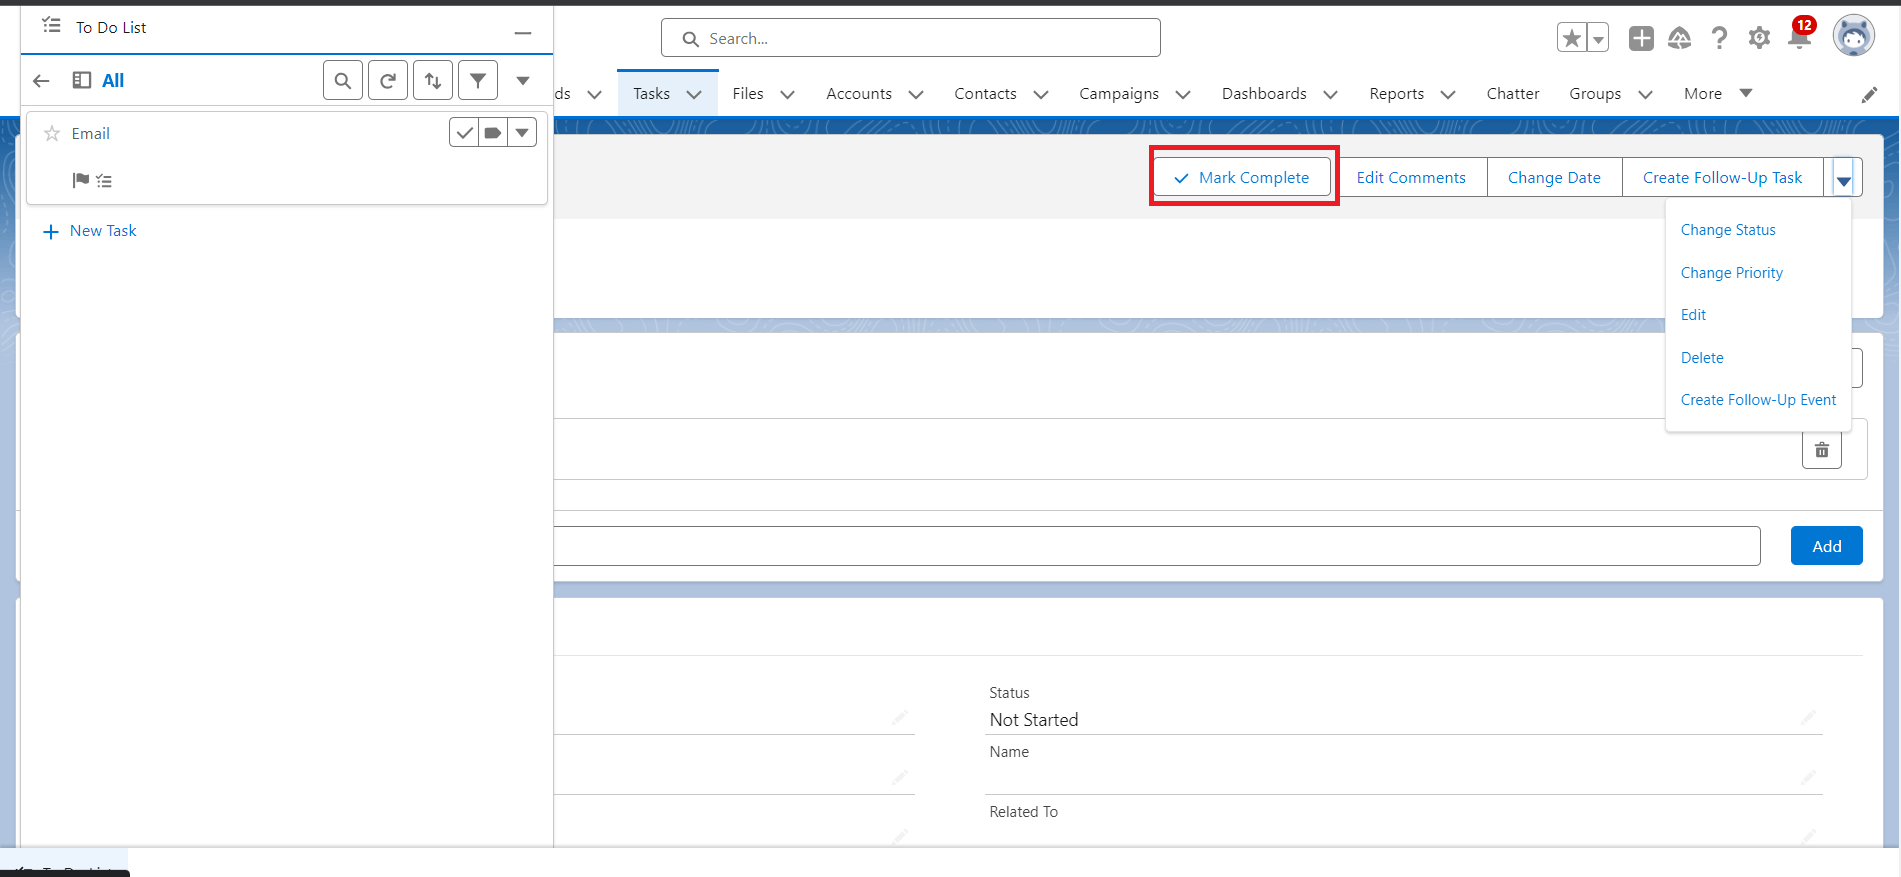 Manage Task record in To Do List component